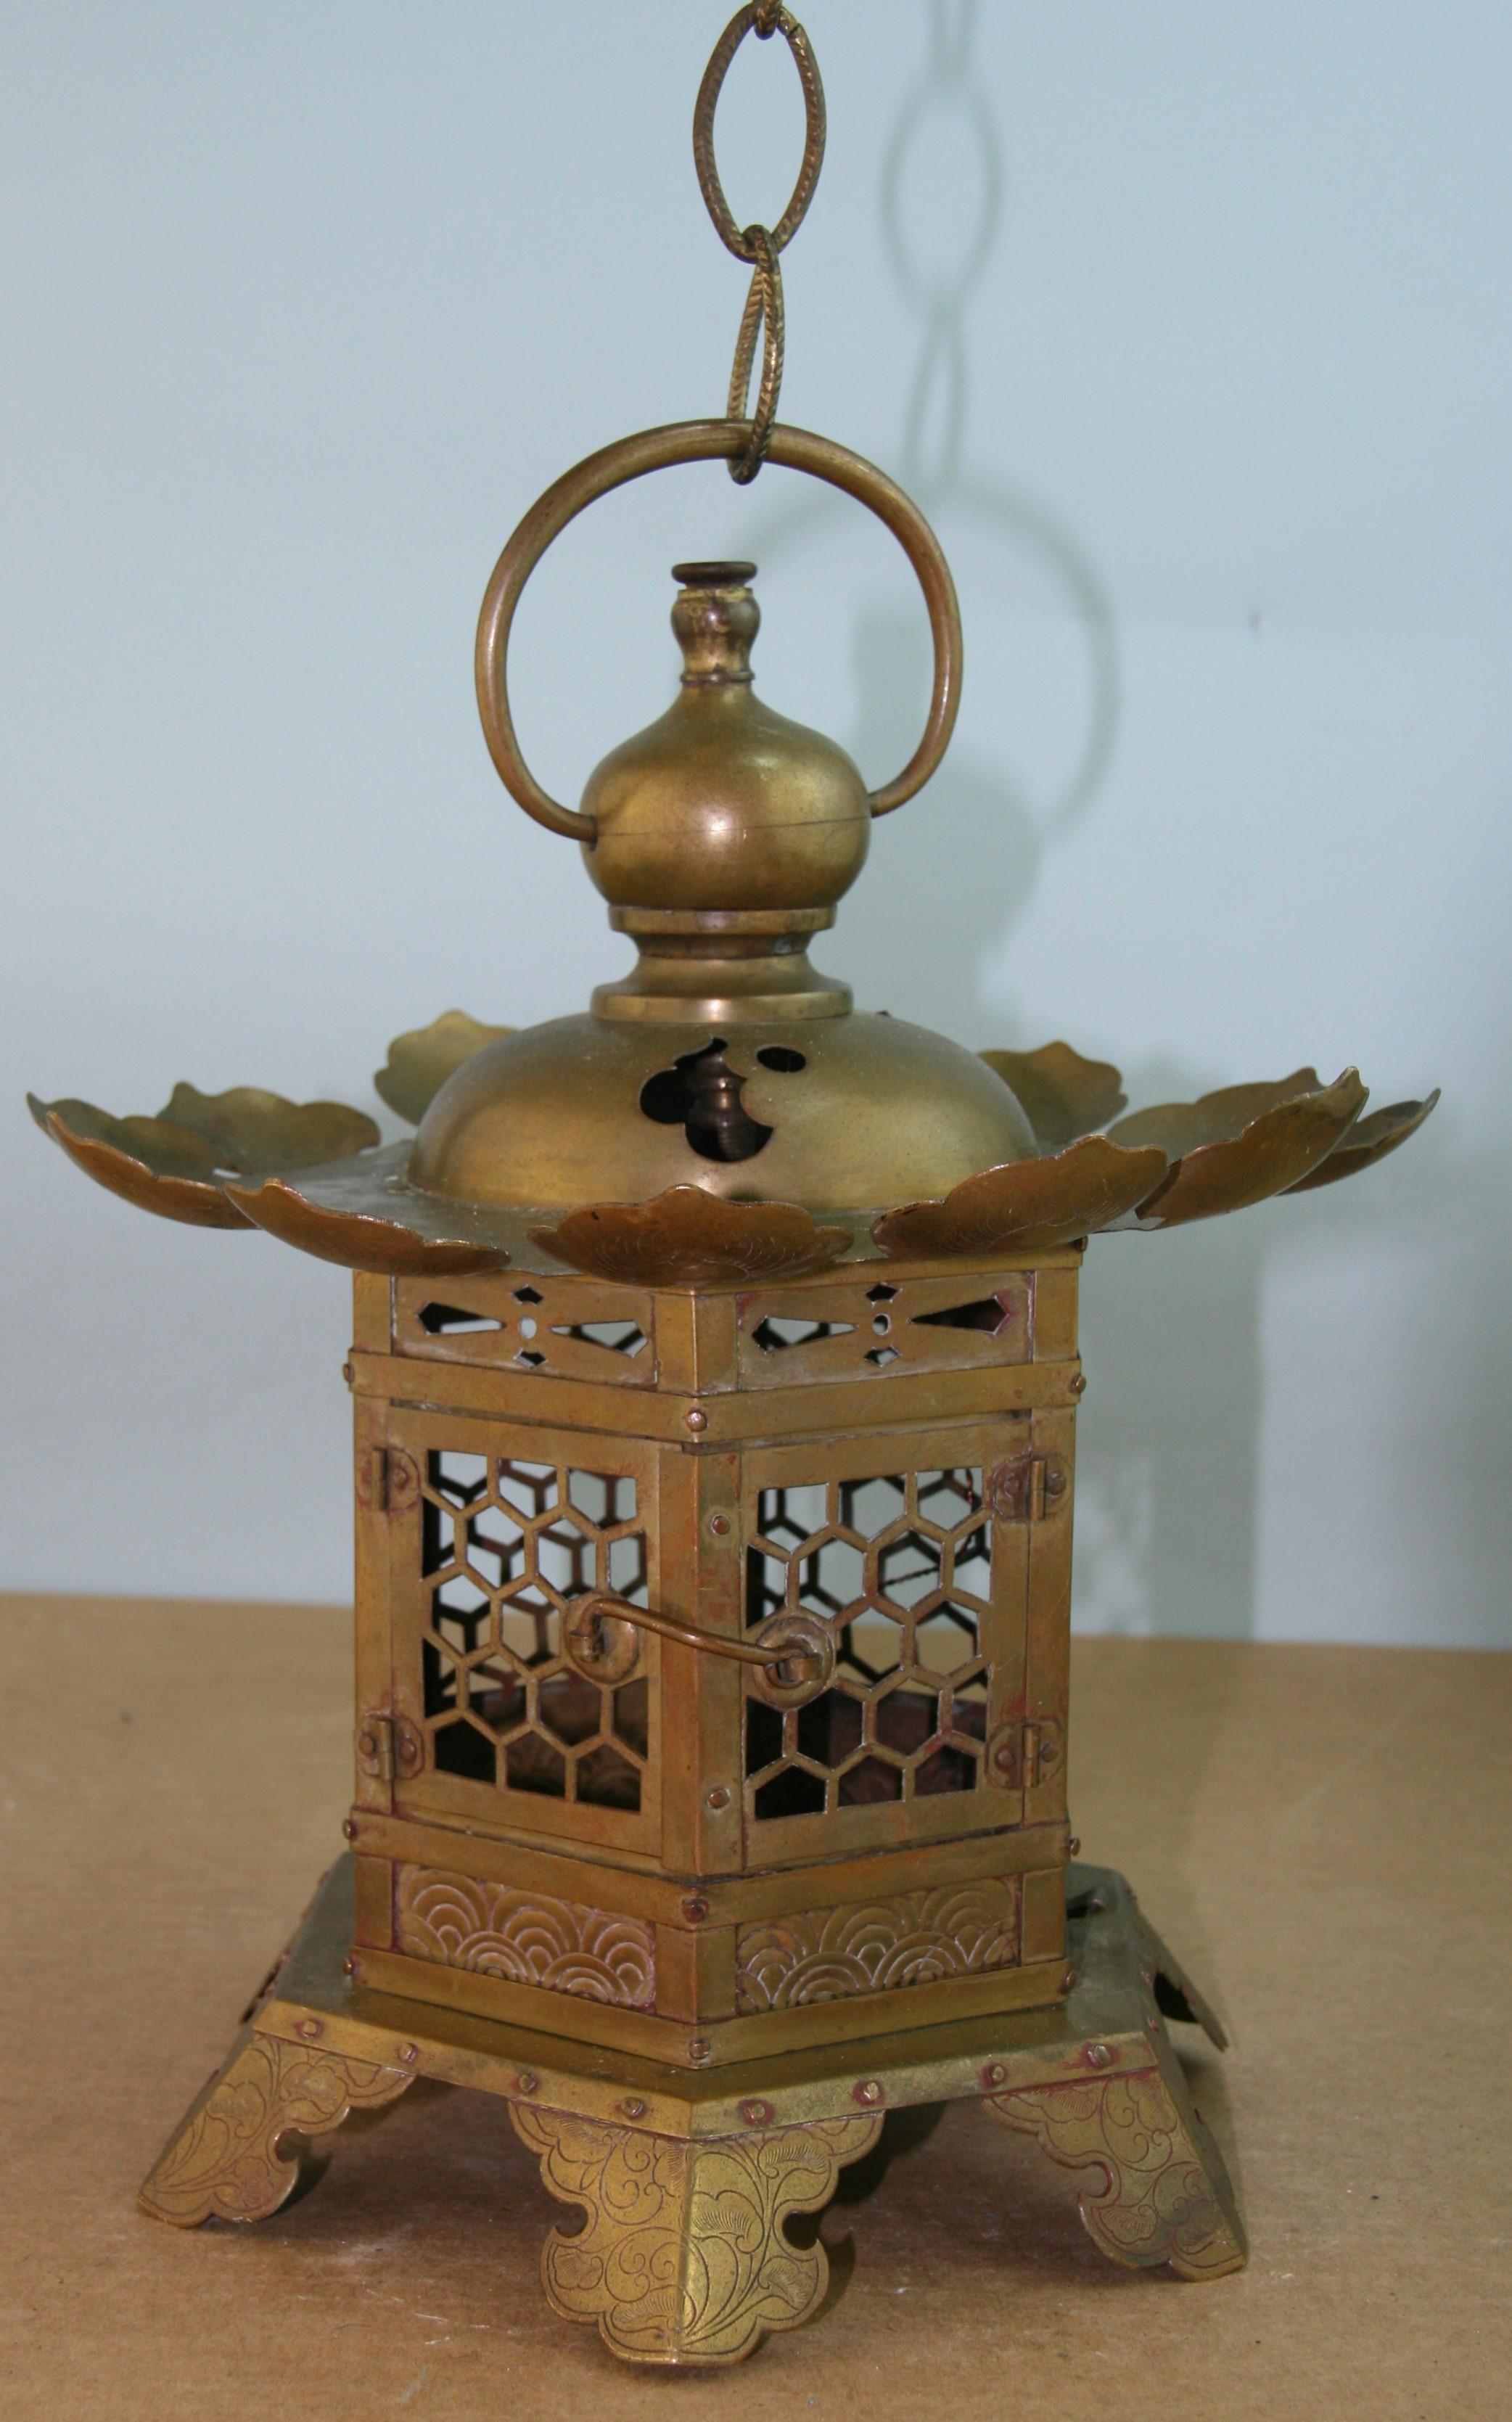 Japanese ornate lotus flower brass garden candle lantern
Supplied with hanging chain.